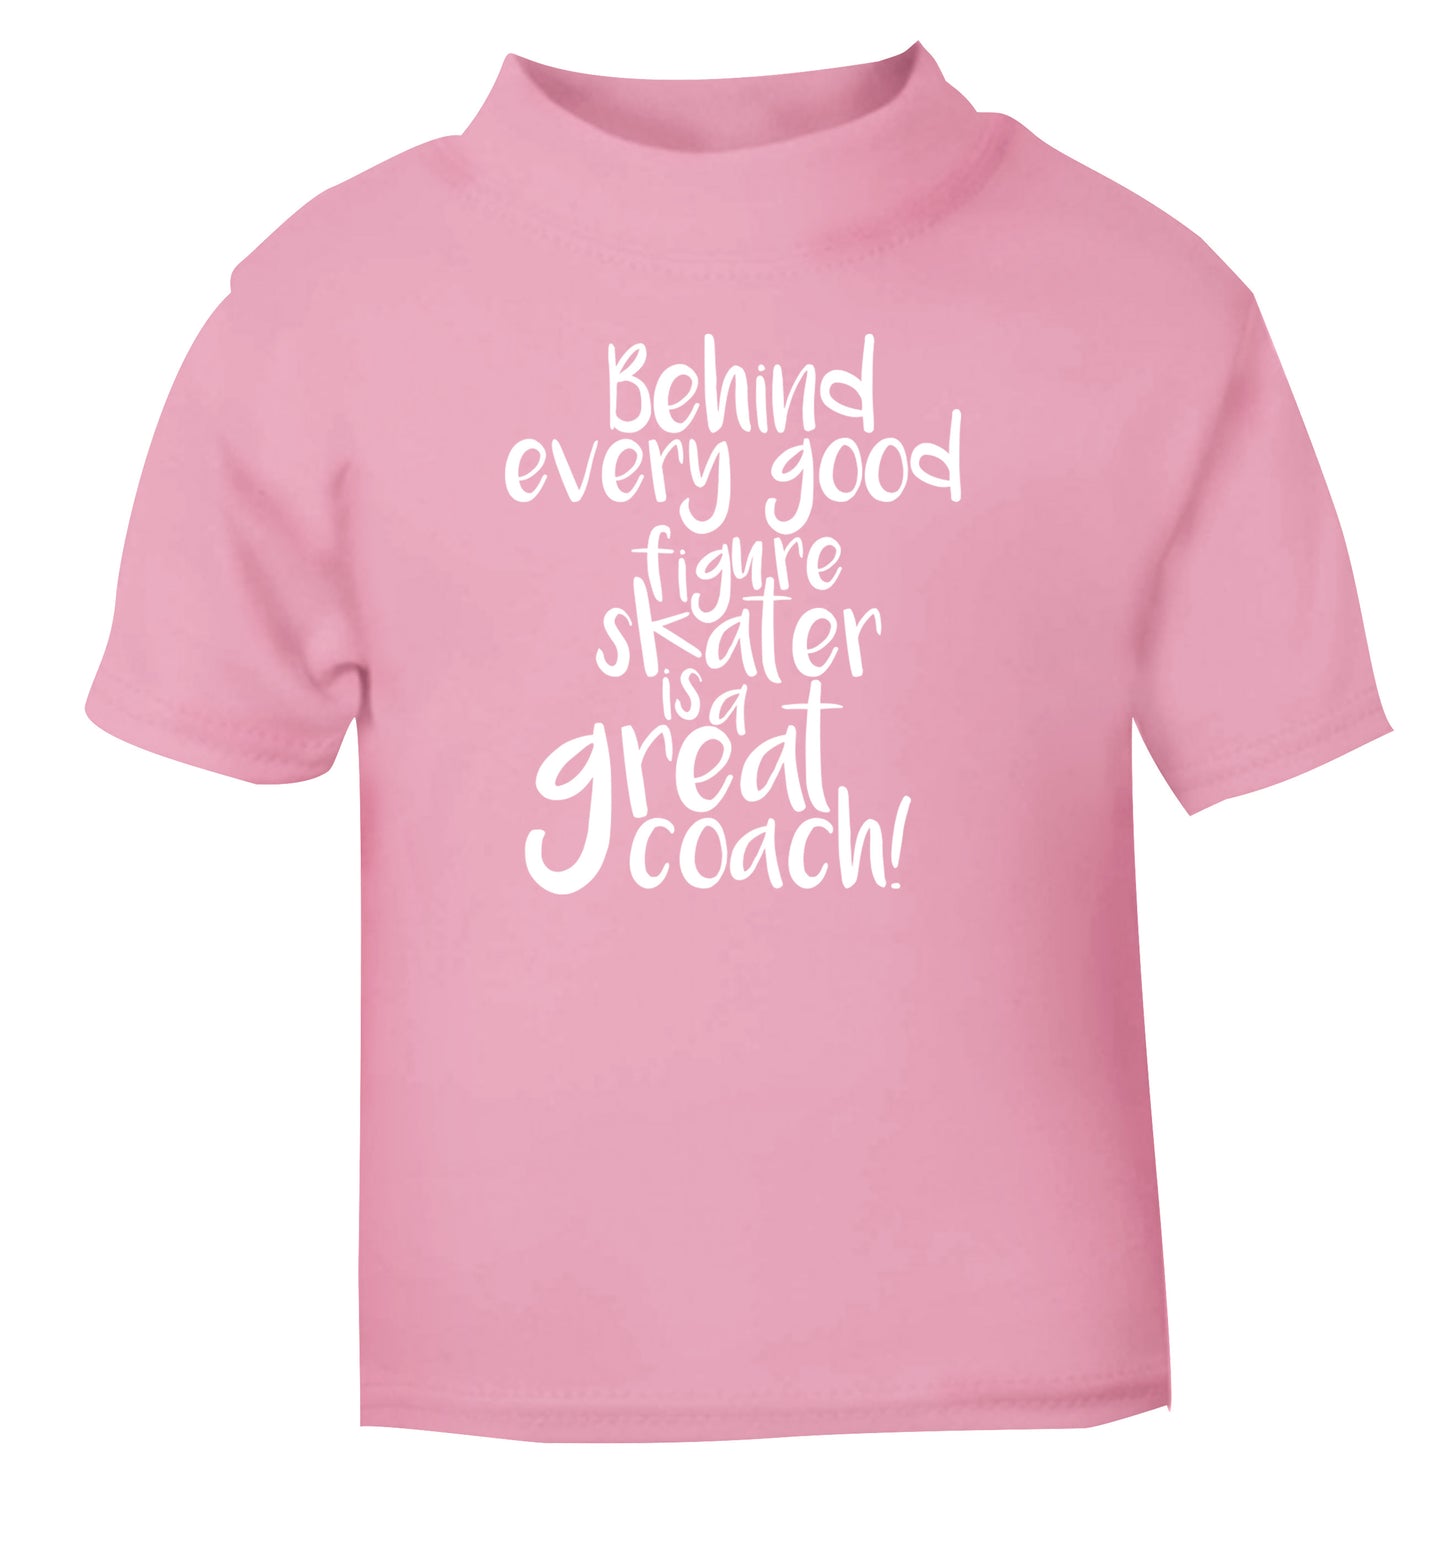 Behind every good figure skater is a great coach light pink Baby Toddler Tshirt 2 Years